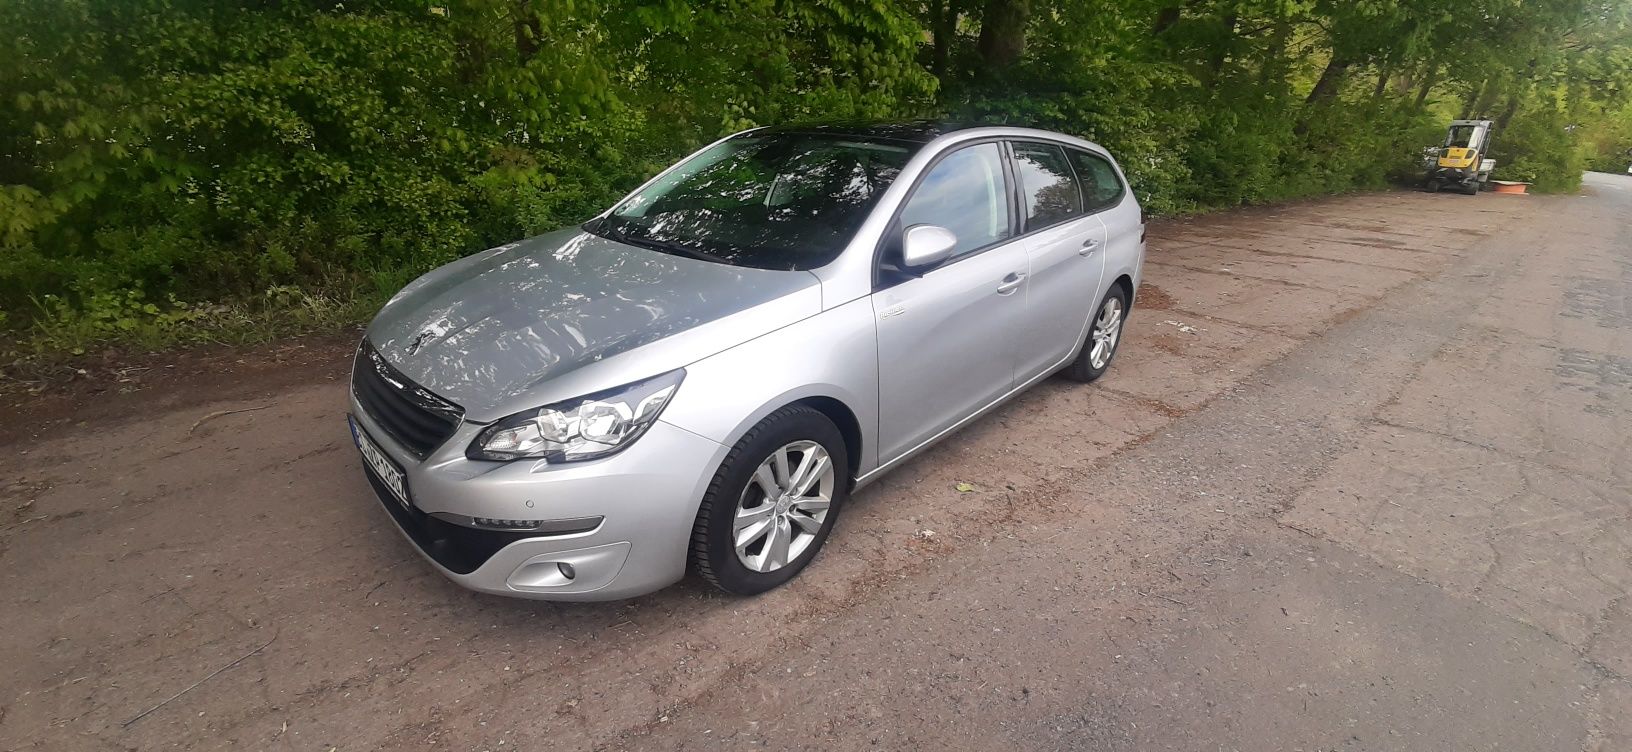 Peugeot 308 HDI 1,6 Bussiness Line